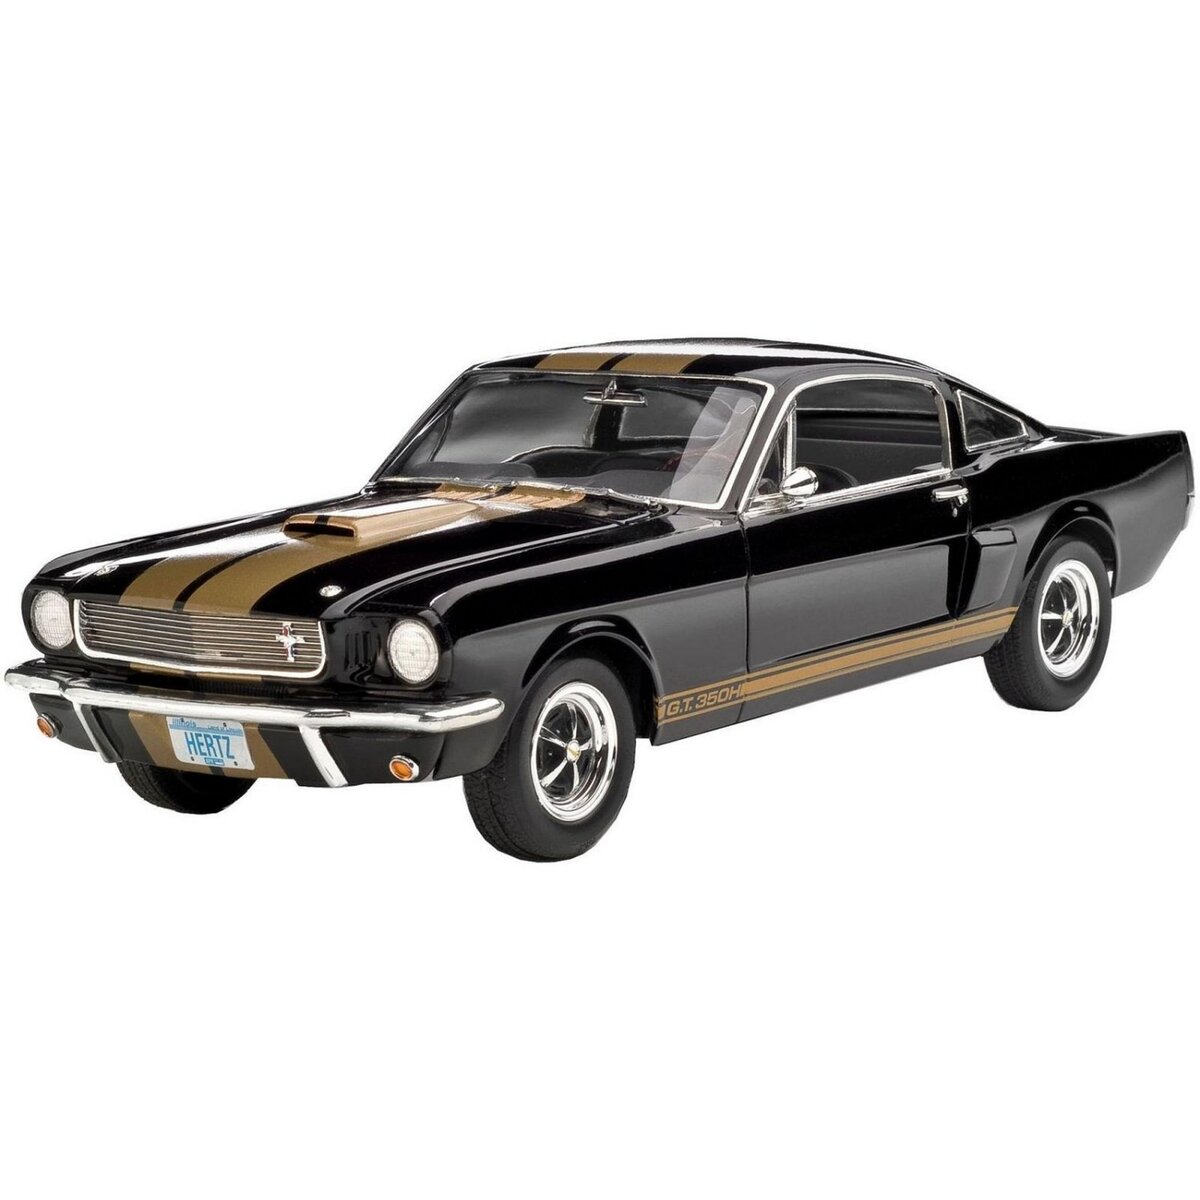 Revell Maquette voiture : Model-Set : Shelby Mustang GT 350 H pas cher 